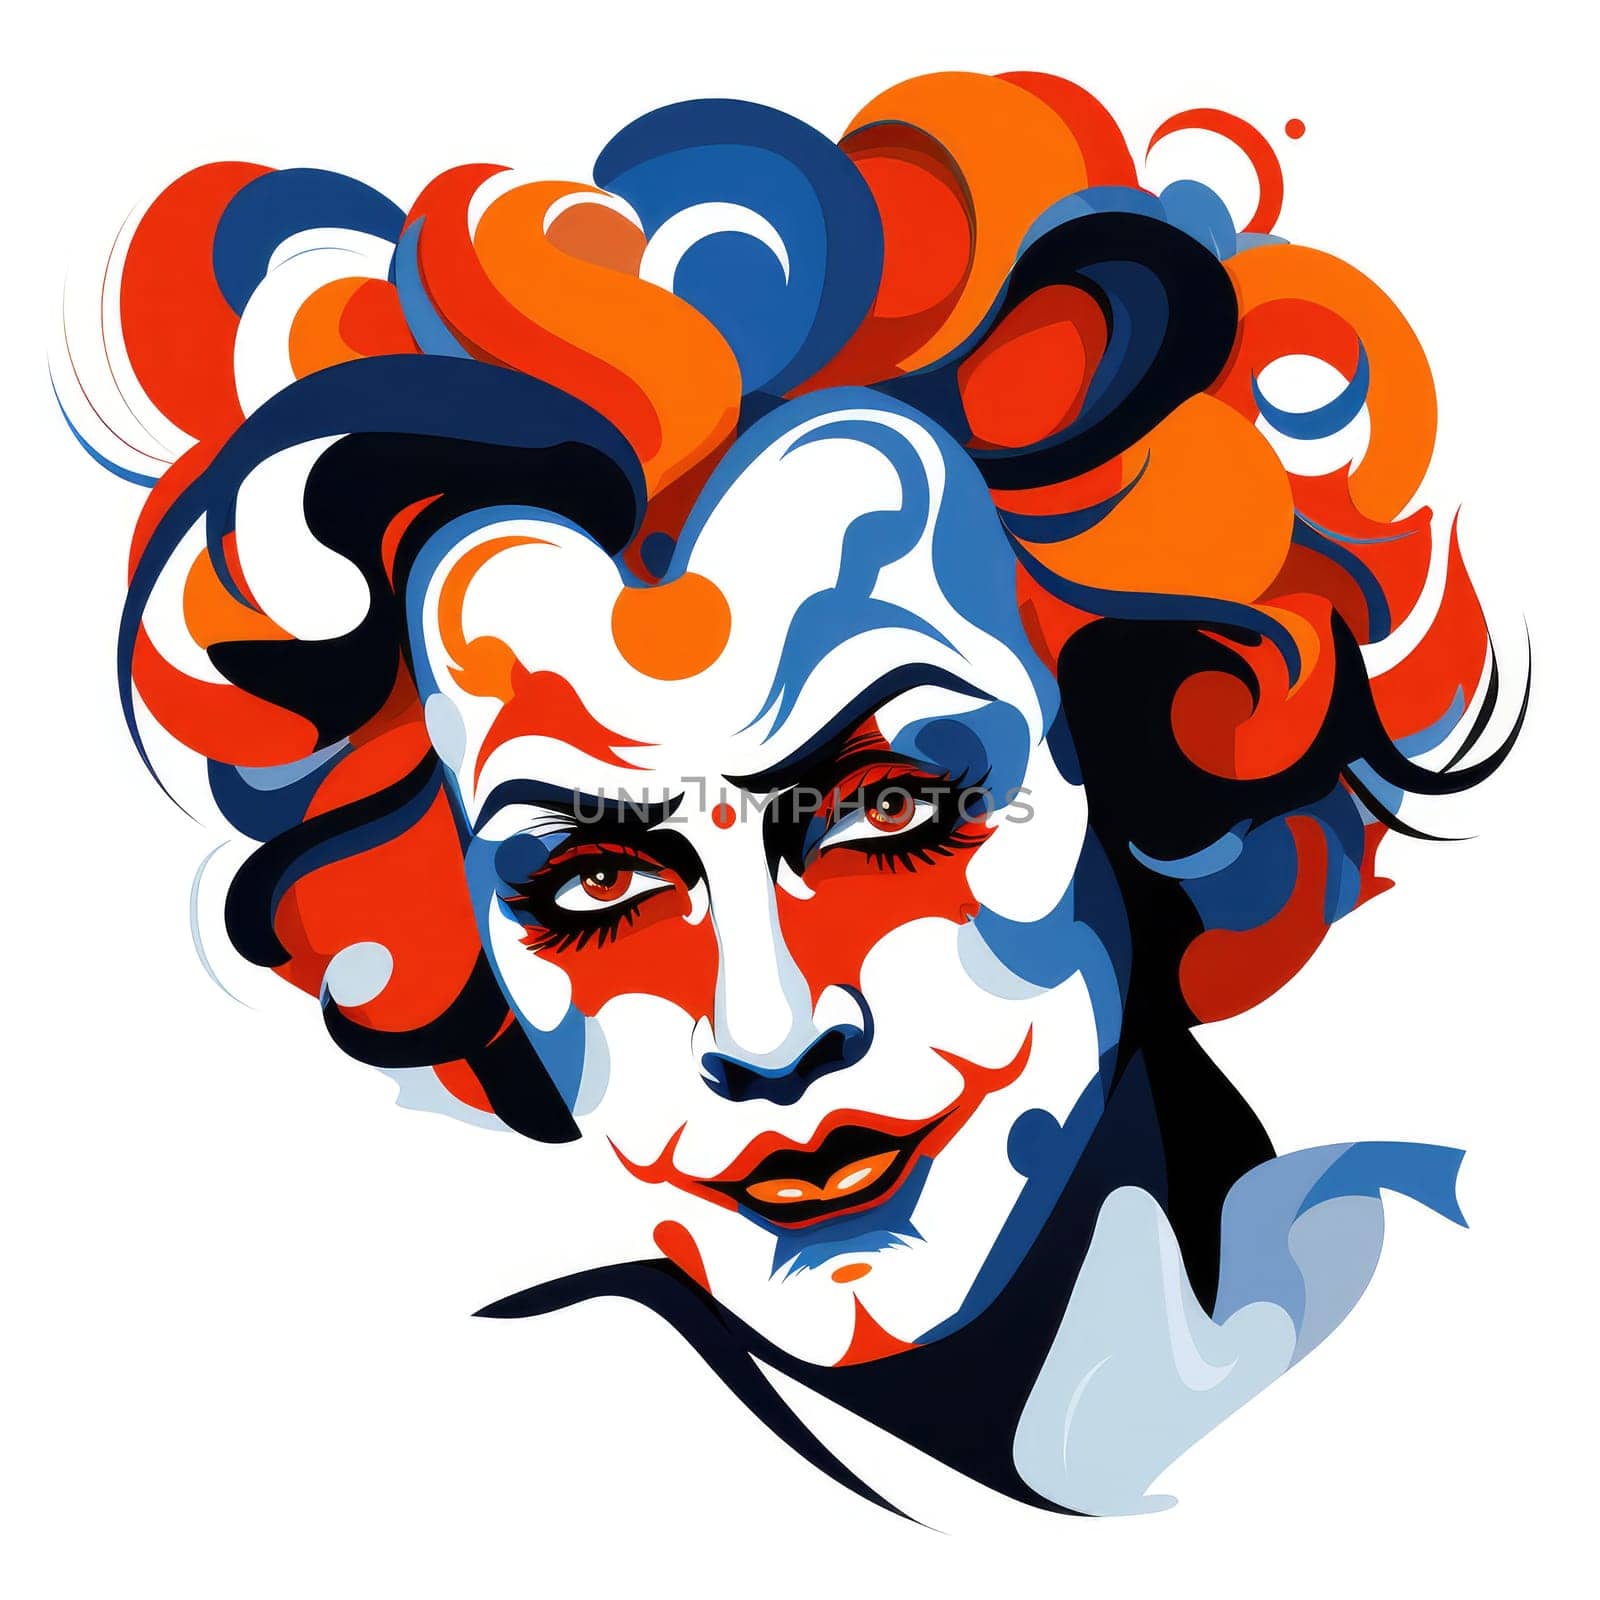 Abstract image of a clown in bright vector pop art style by palinchak